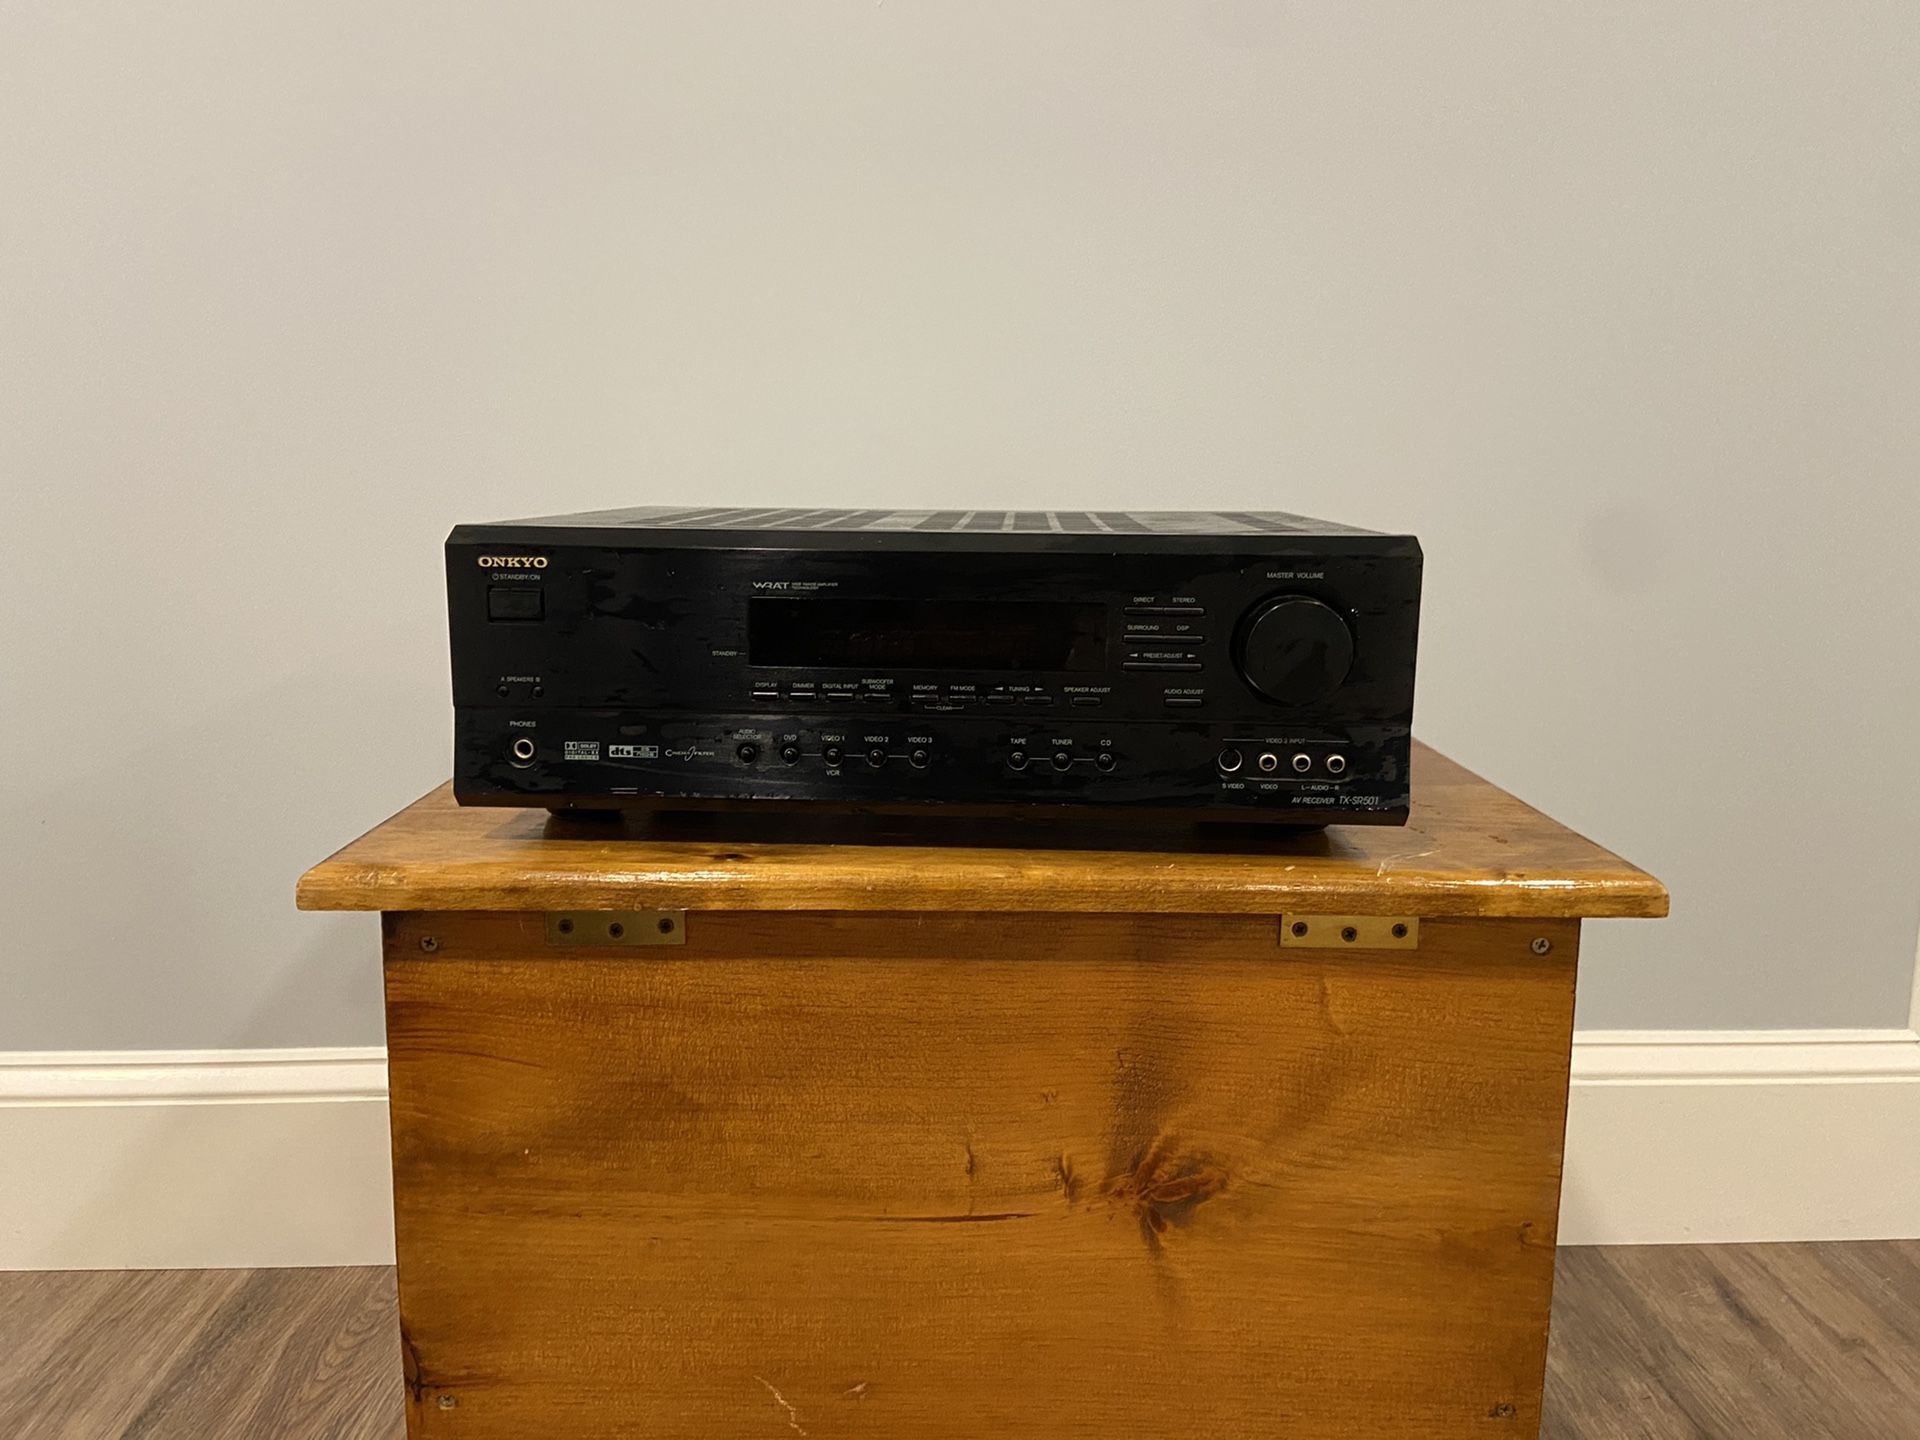 Onkyo TX-SR501 6.1 home theater receiver (remote not included )